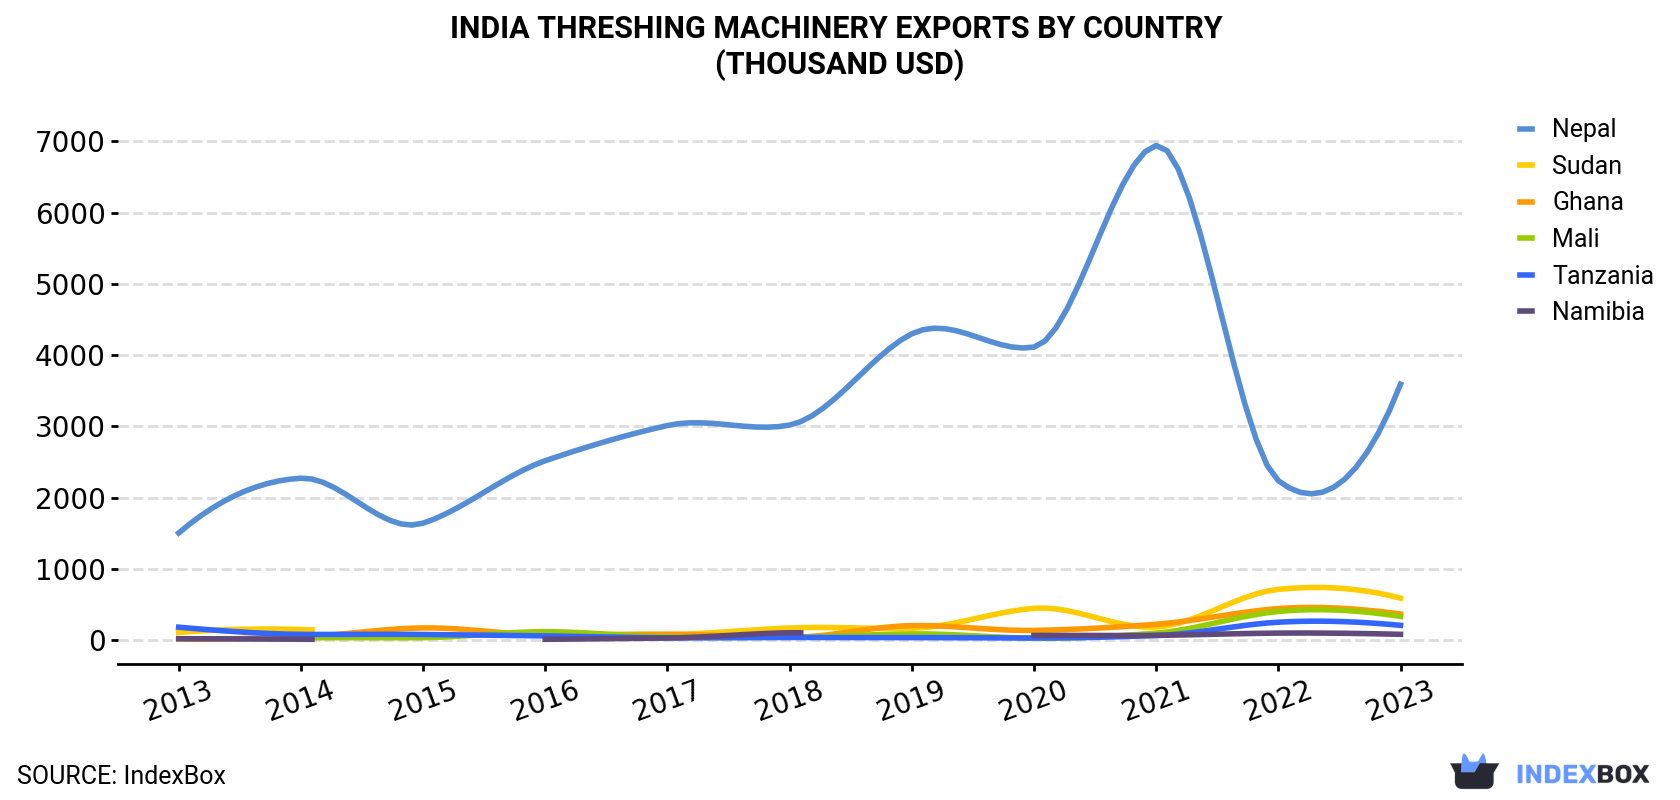 India Threshing Machinery Exports By Country (Thousand USD)